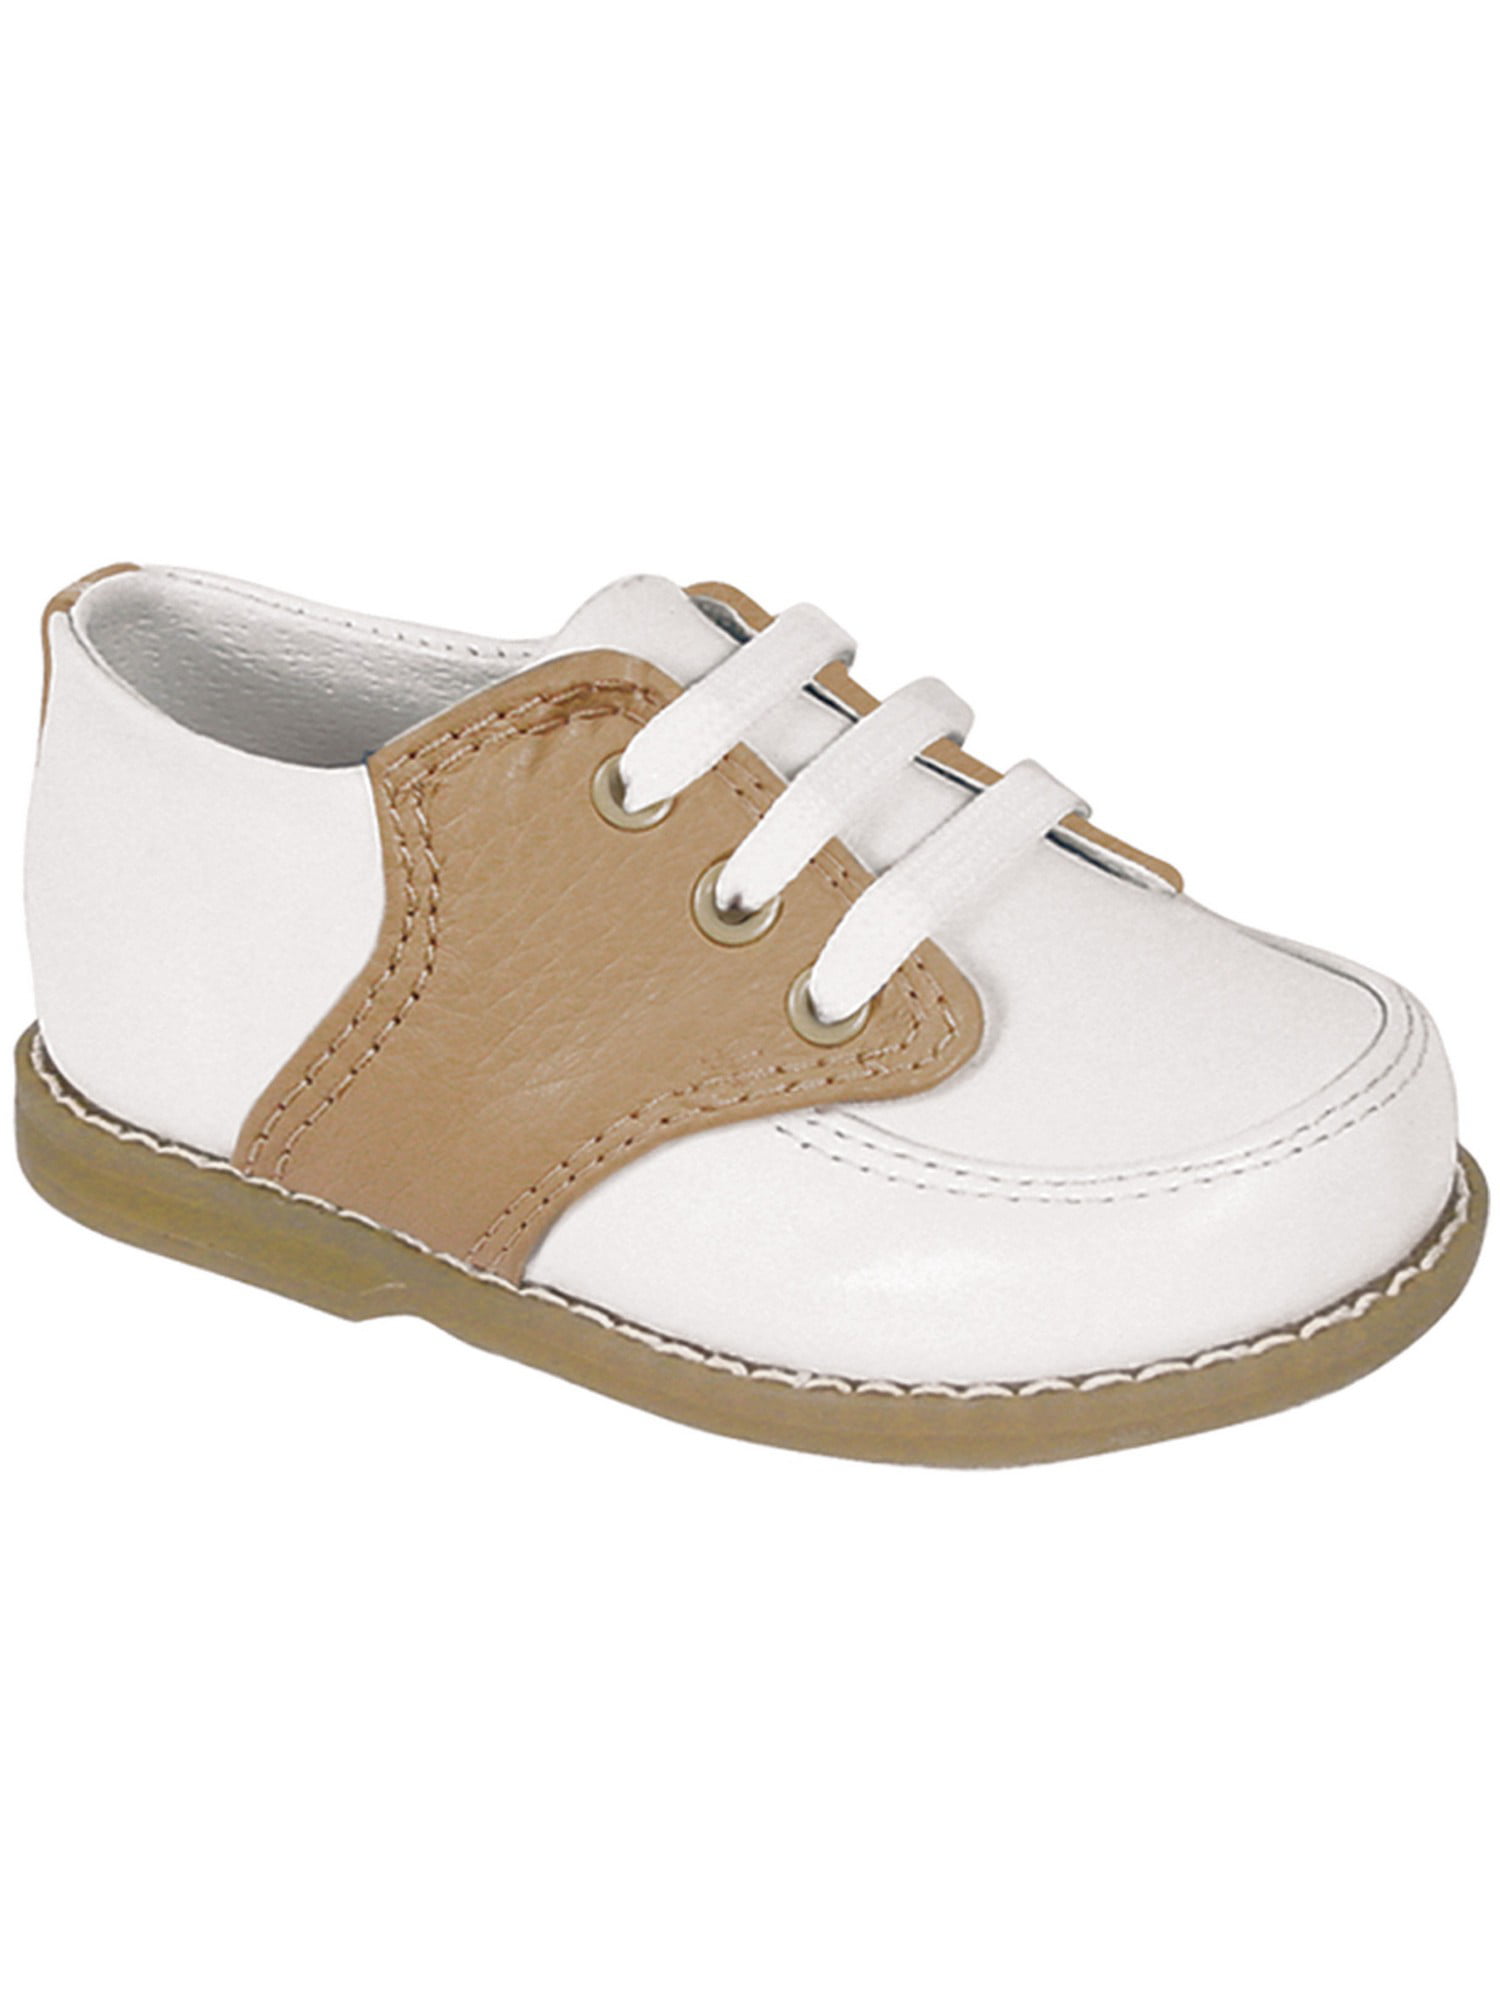 baby boy oxford shoes